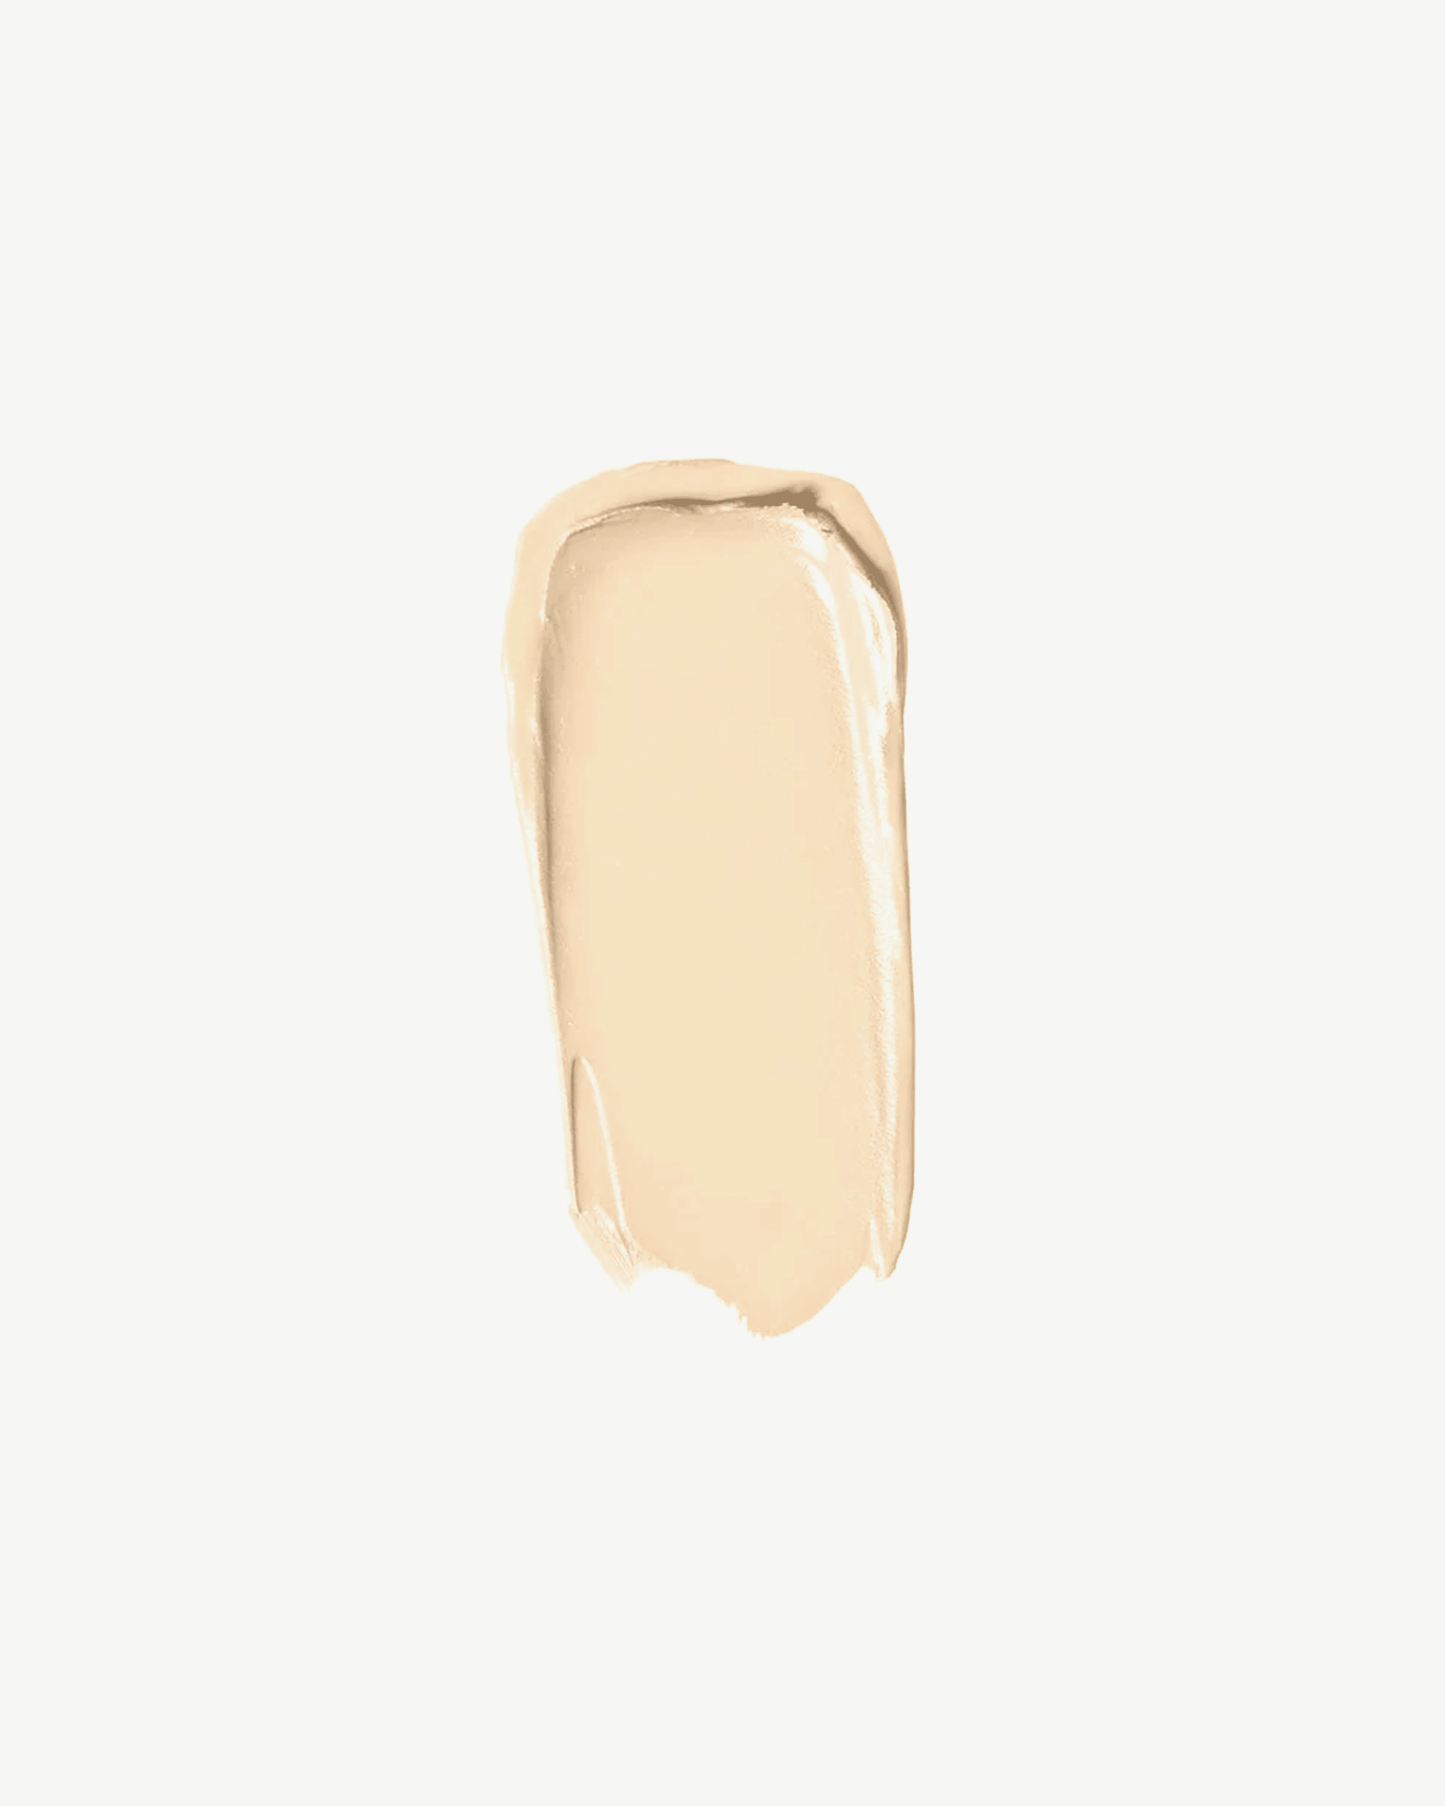 Gold 20 (fair to light with gold undertones)